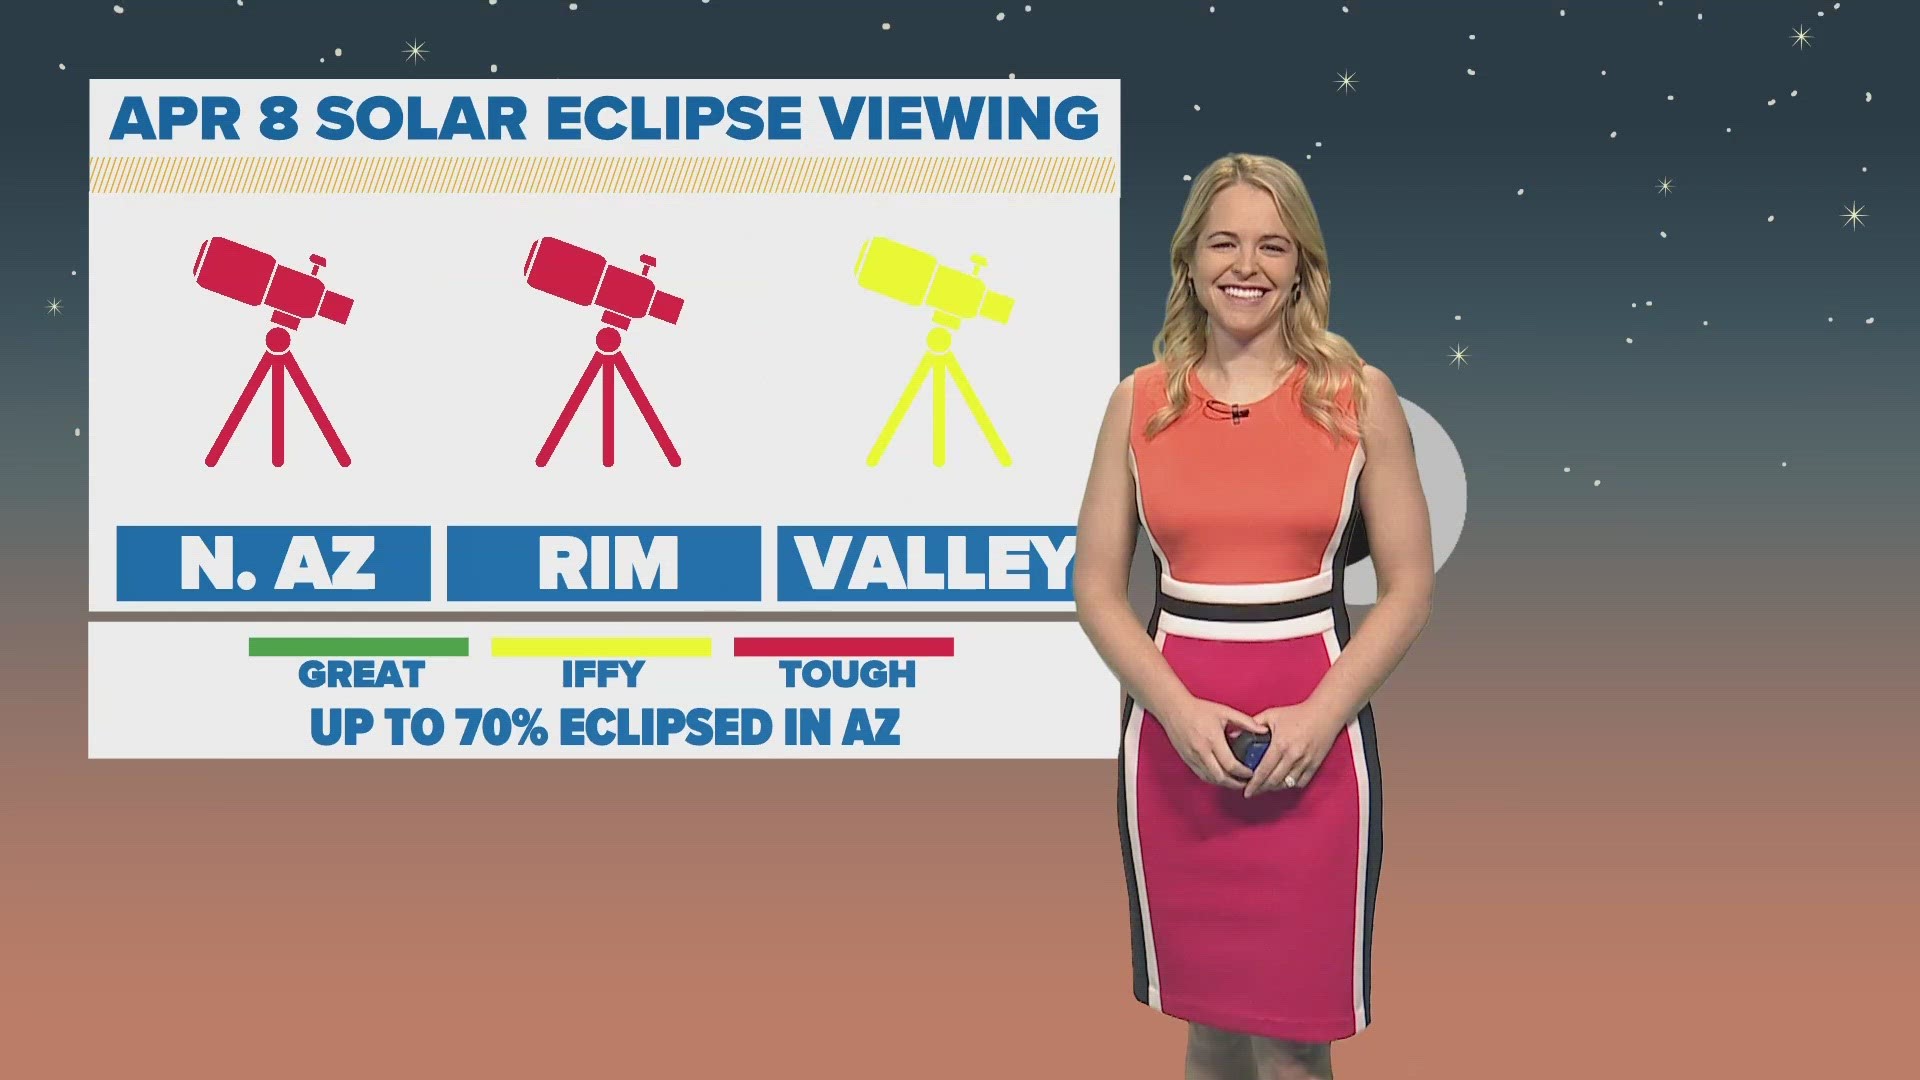 What will the viewing experience be like for the solar eclipse in Arizona? Lauren Rainson has the answer.